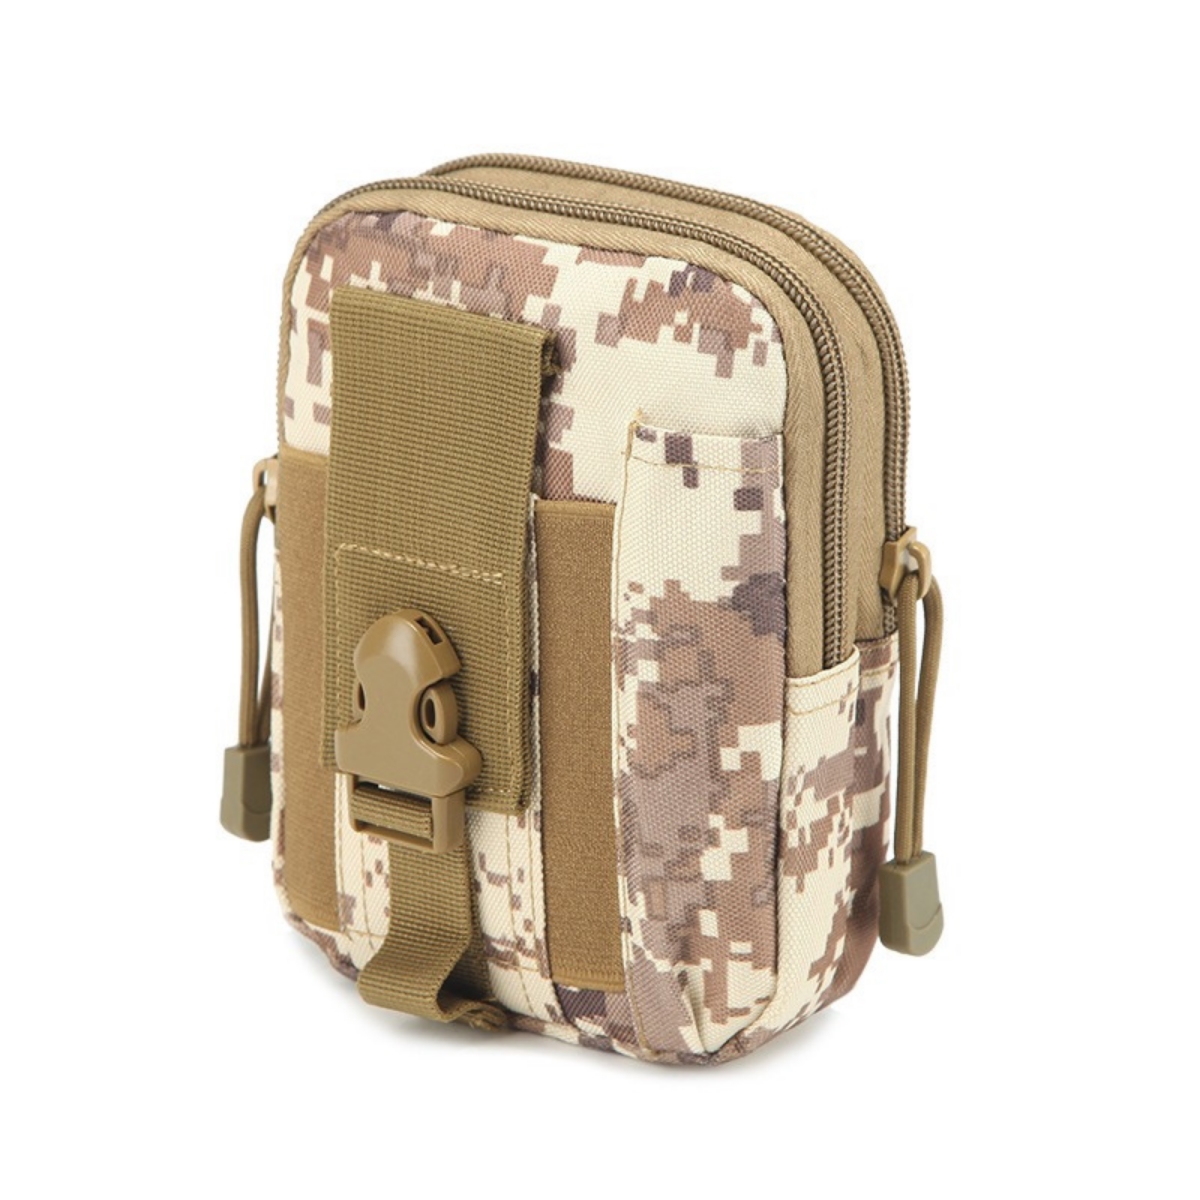 Picture of JupiterGear JG-SLNGBAG2-DSRT Tactical MOLLE Military Pouch Waist Bag for Hiking and Outdoor Activities (JG-SLNGBAG2-DSRT ) Desert